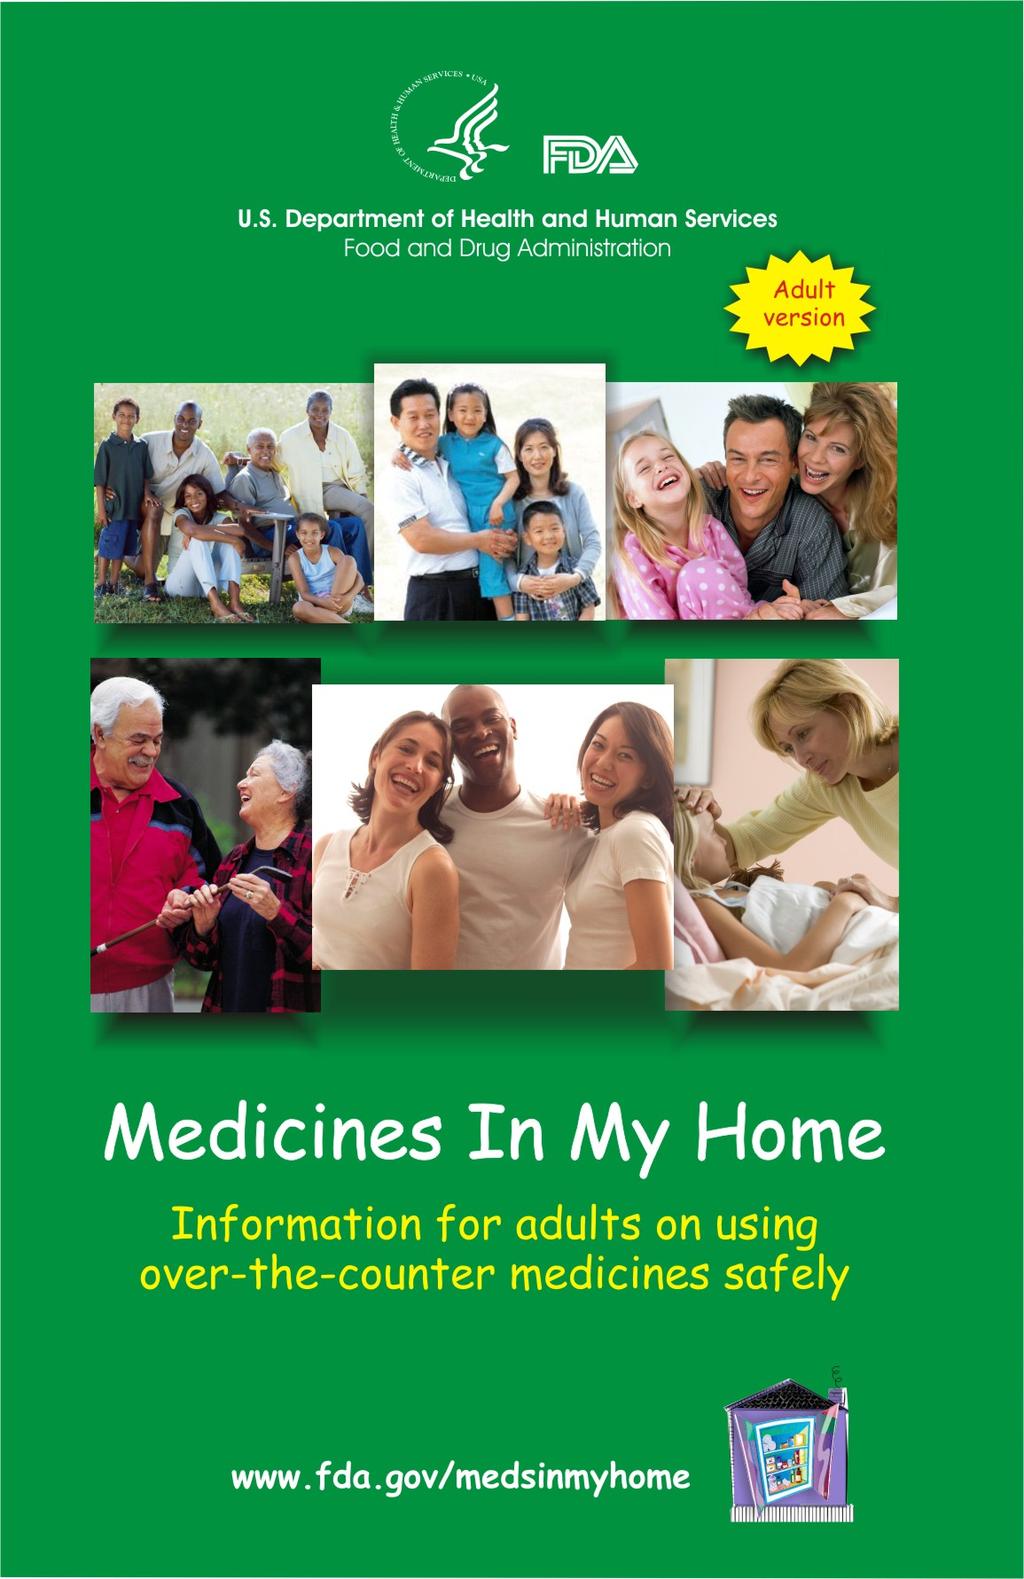 More about using medicines safely Medicines in My Home: FDA Consumer Medicine Education: www.fda.gov/usemedicinesafely National Council on Patient Information and Education: www.bemedwise.